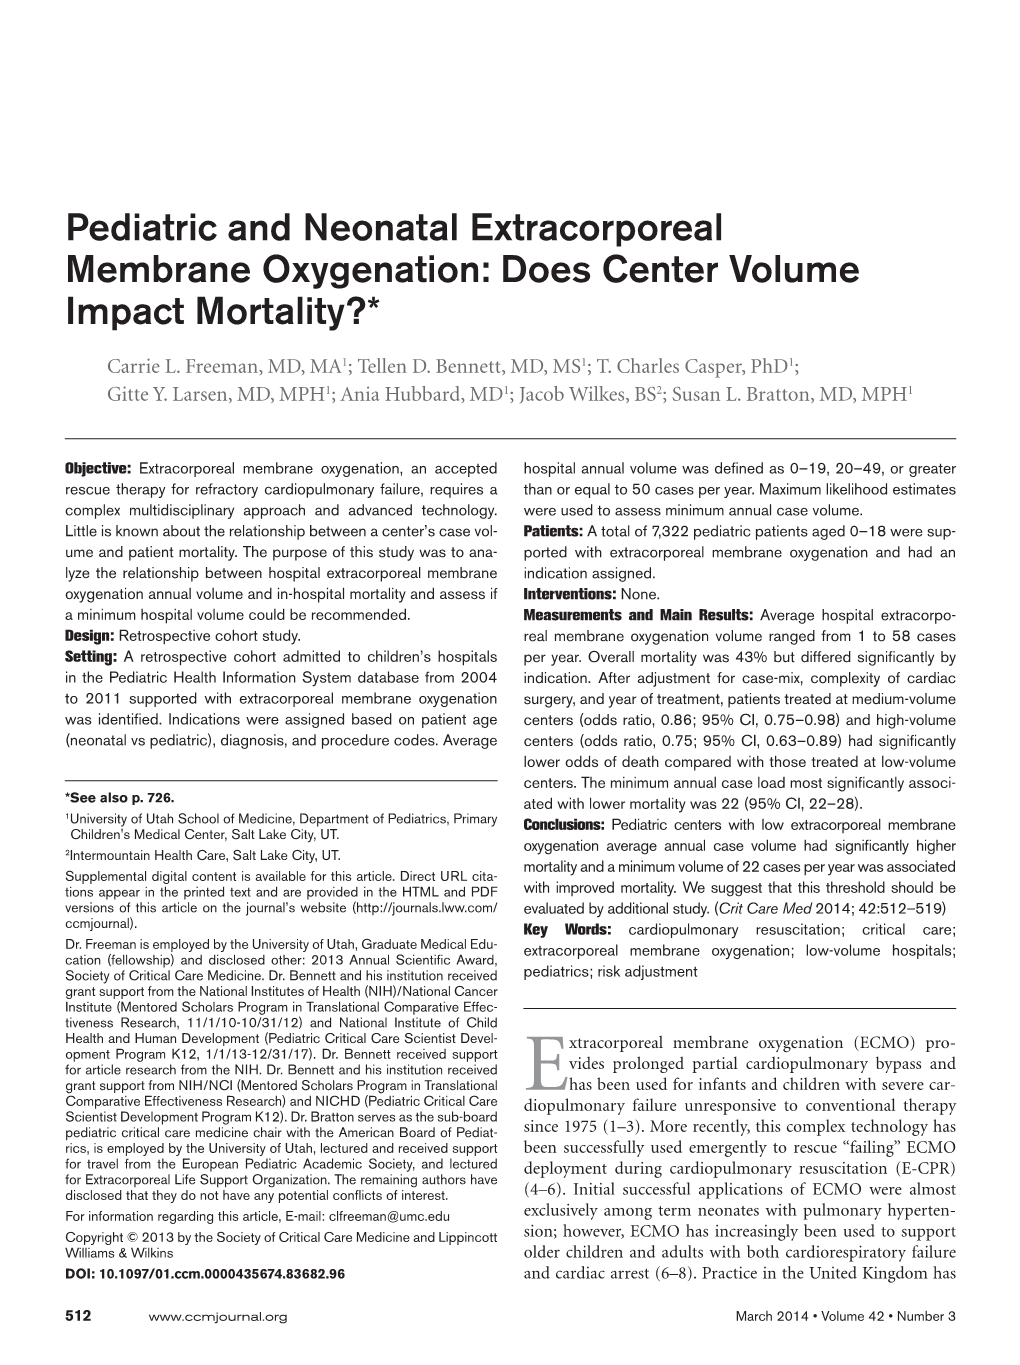 Pediatric and Neonatal Extracorporeal Membrane Oxygenation: Does Center Volume Impact Mortality?* Crit Care Med Carrie L